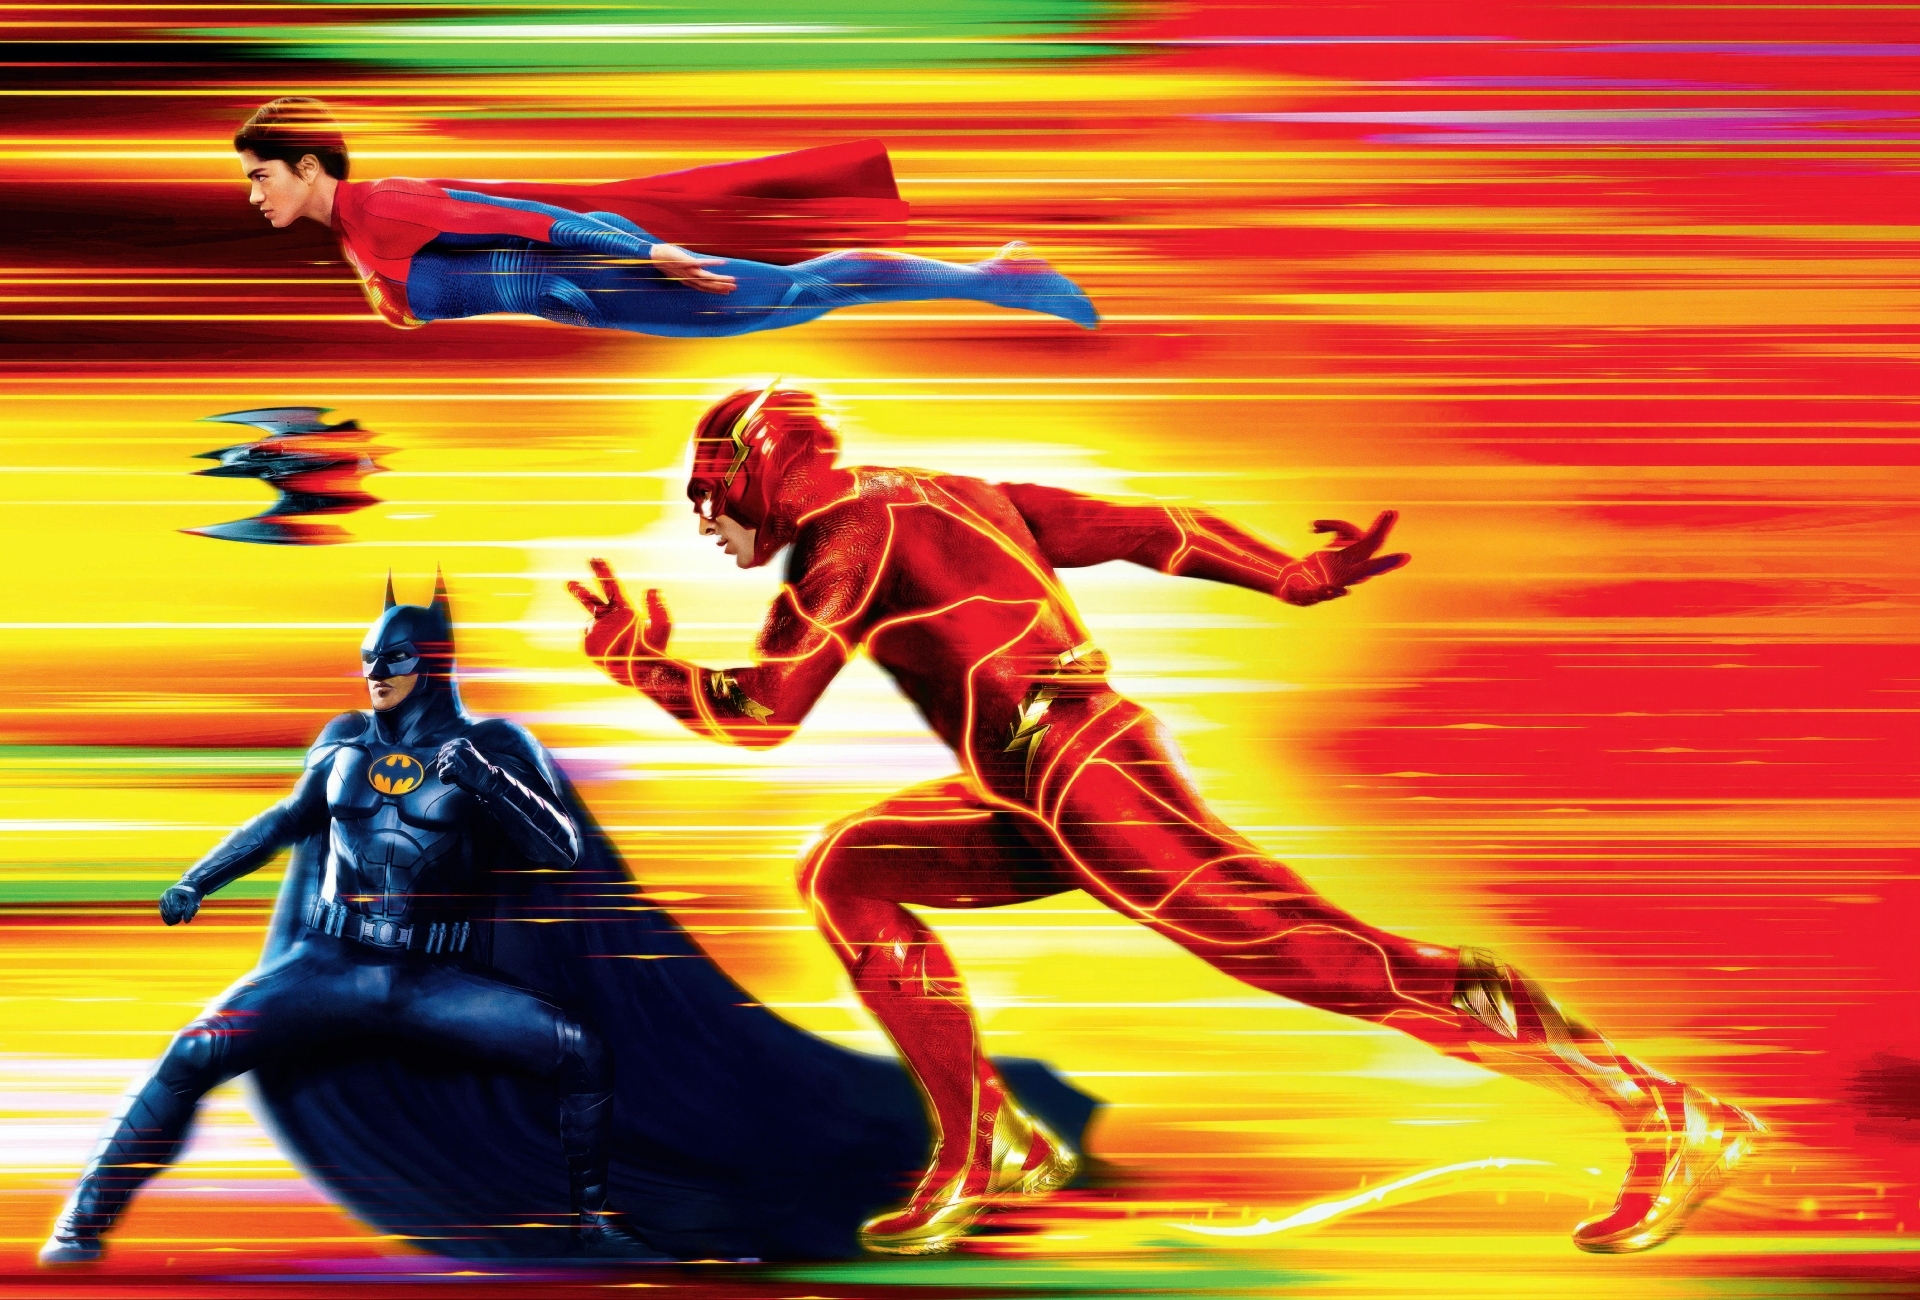 DC Characters in The Flash Movie Wallpaper, HD Movies 4K Wallpapers ...